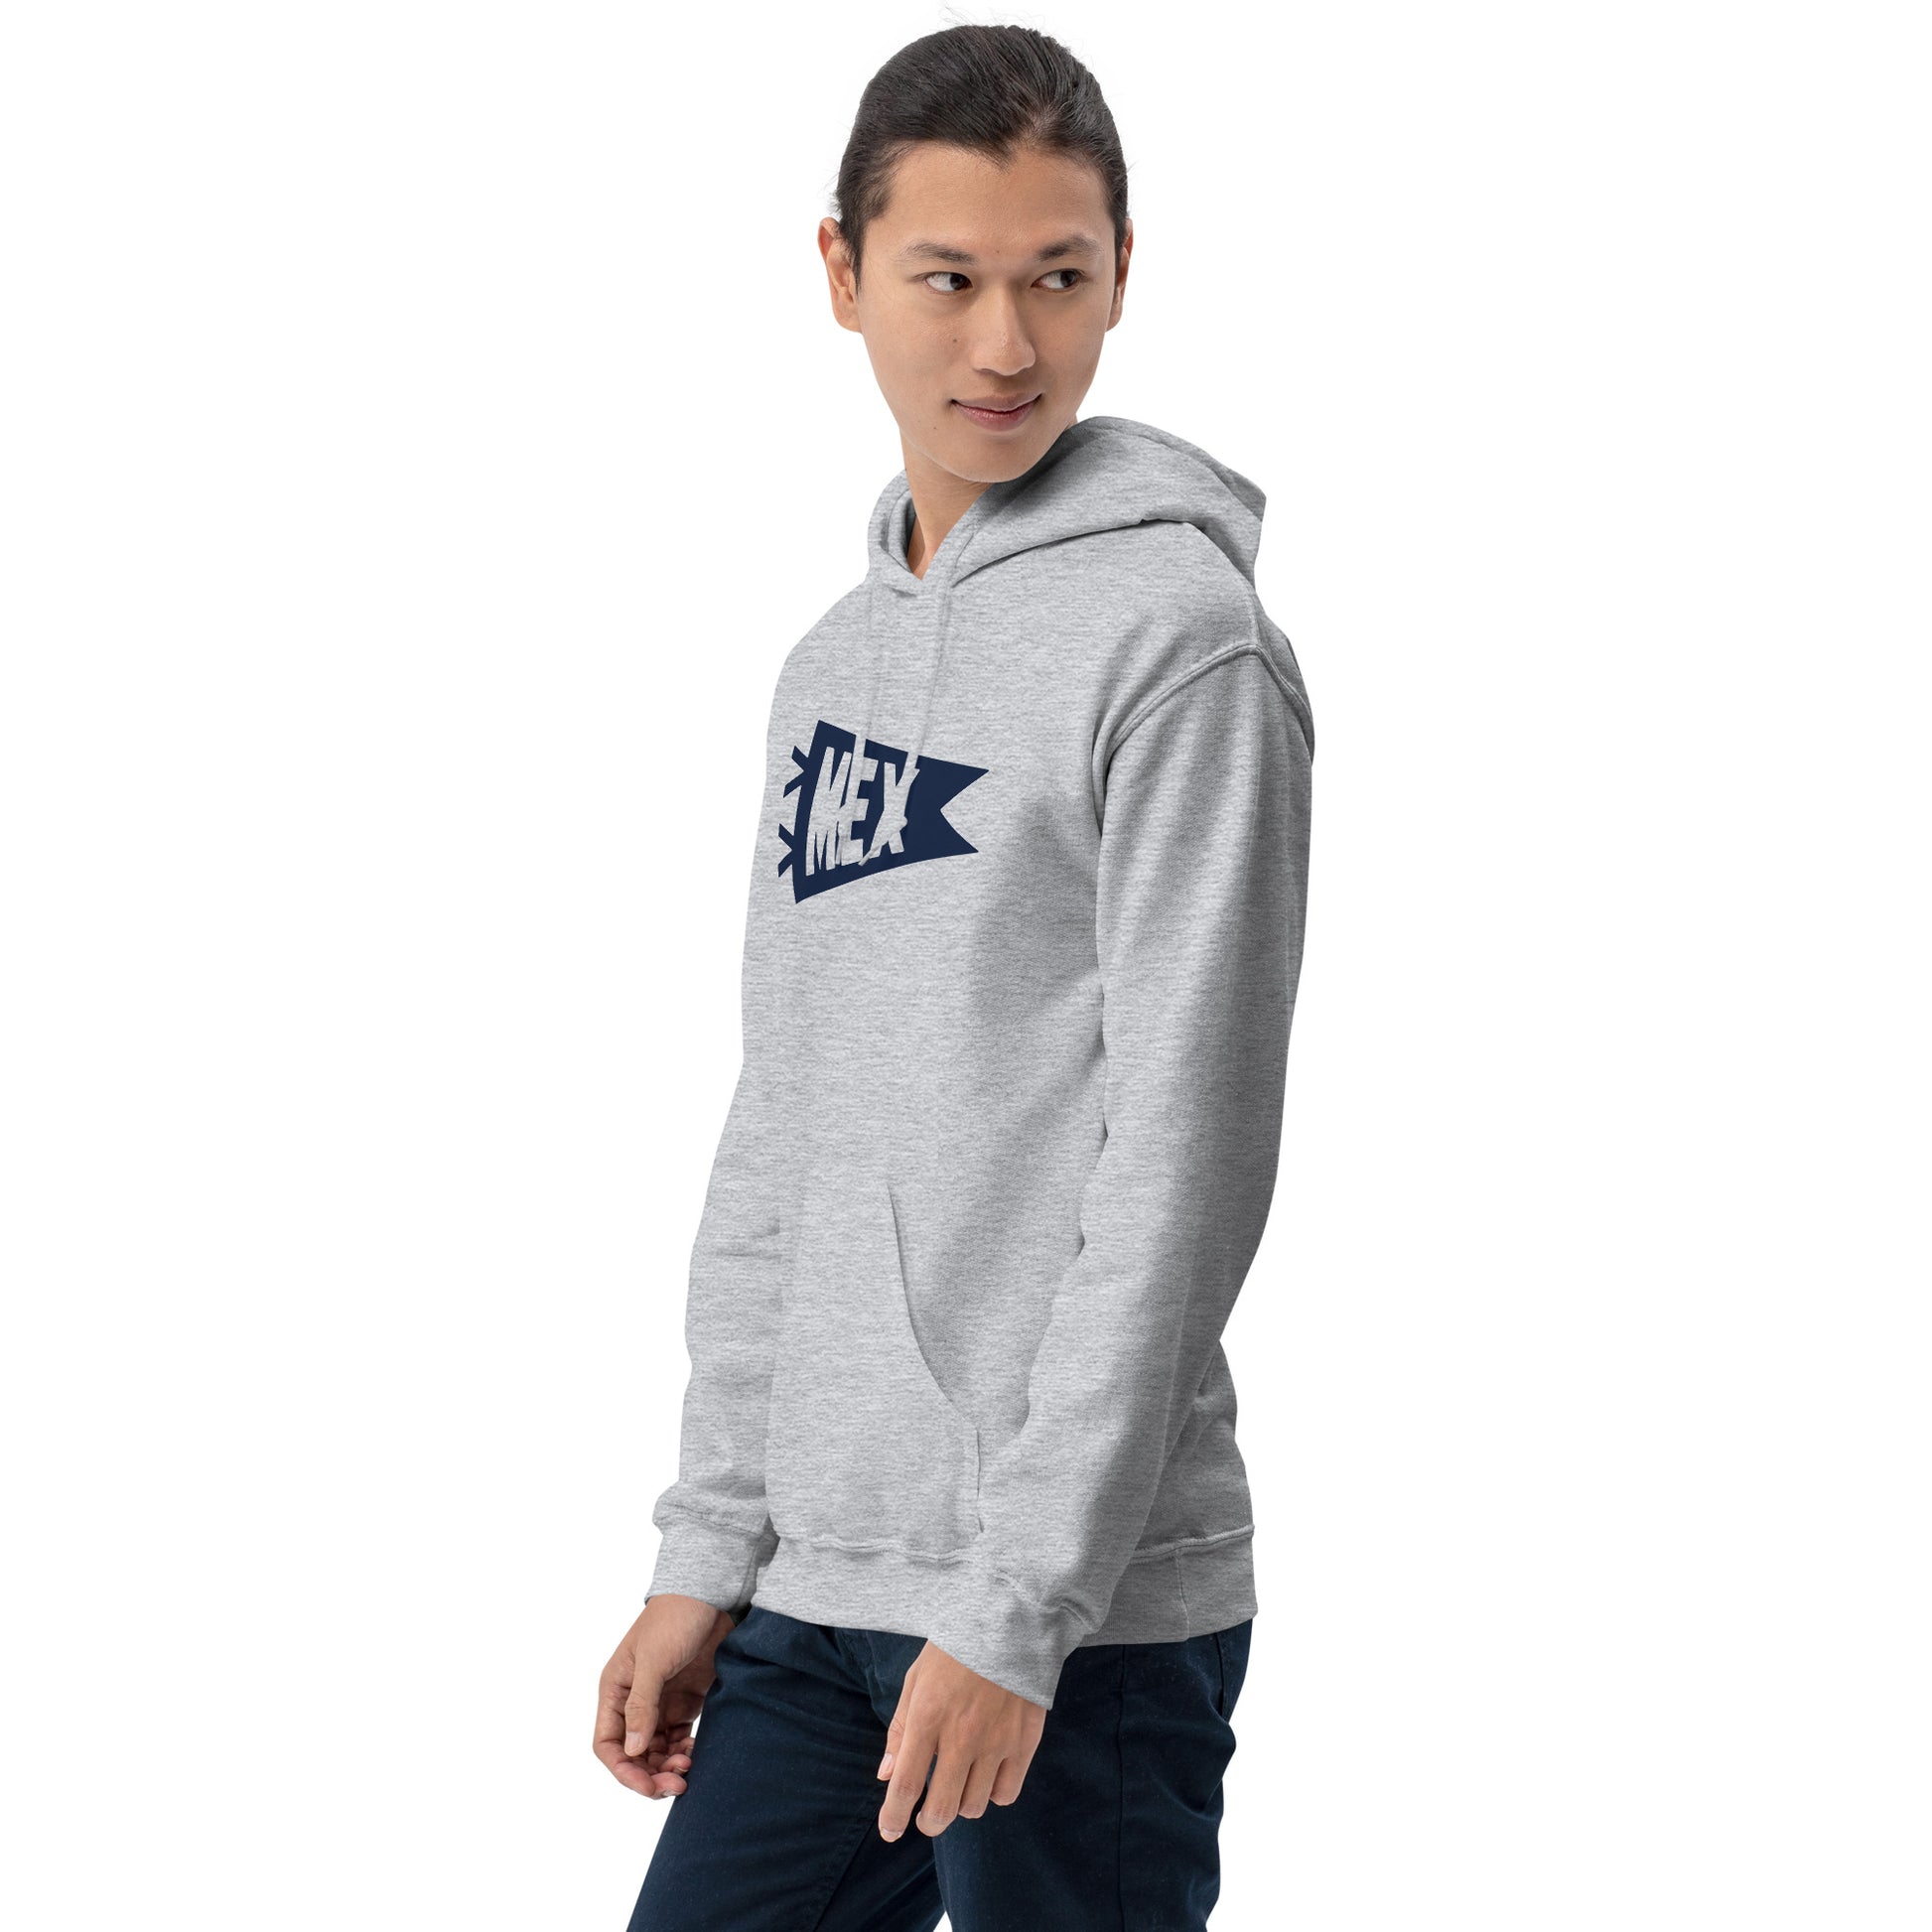 Airport Code Unisex Hoodie - Navy Blue Graphic • MEX Mexico City • YHM Designs - Image 10